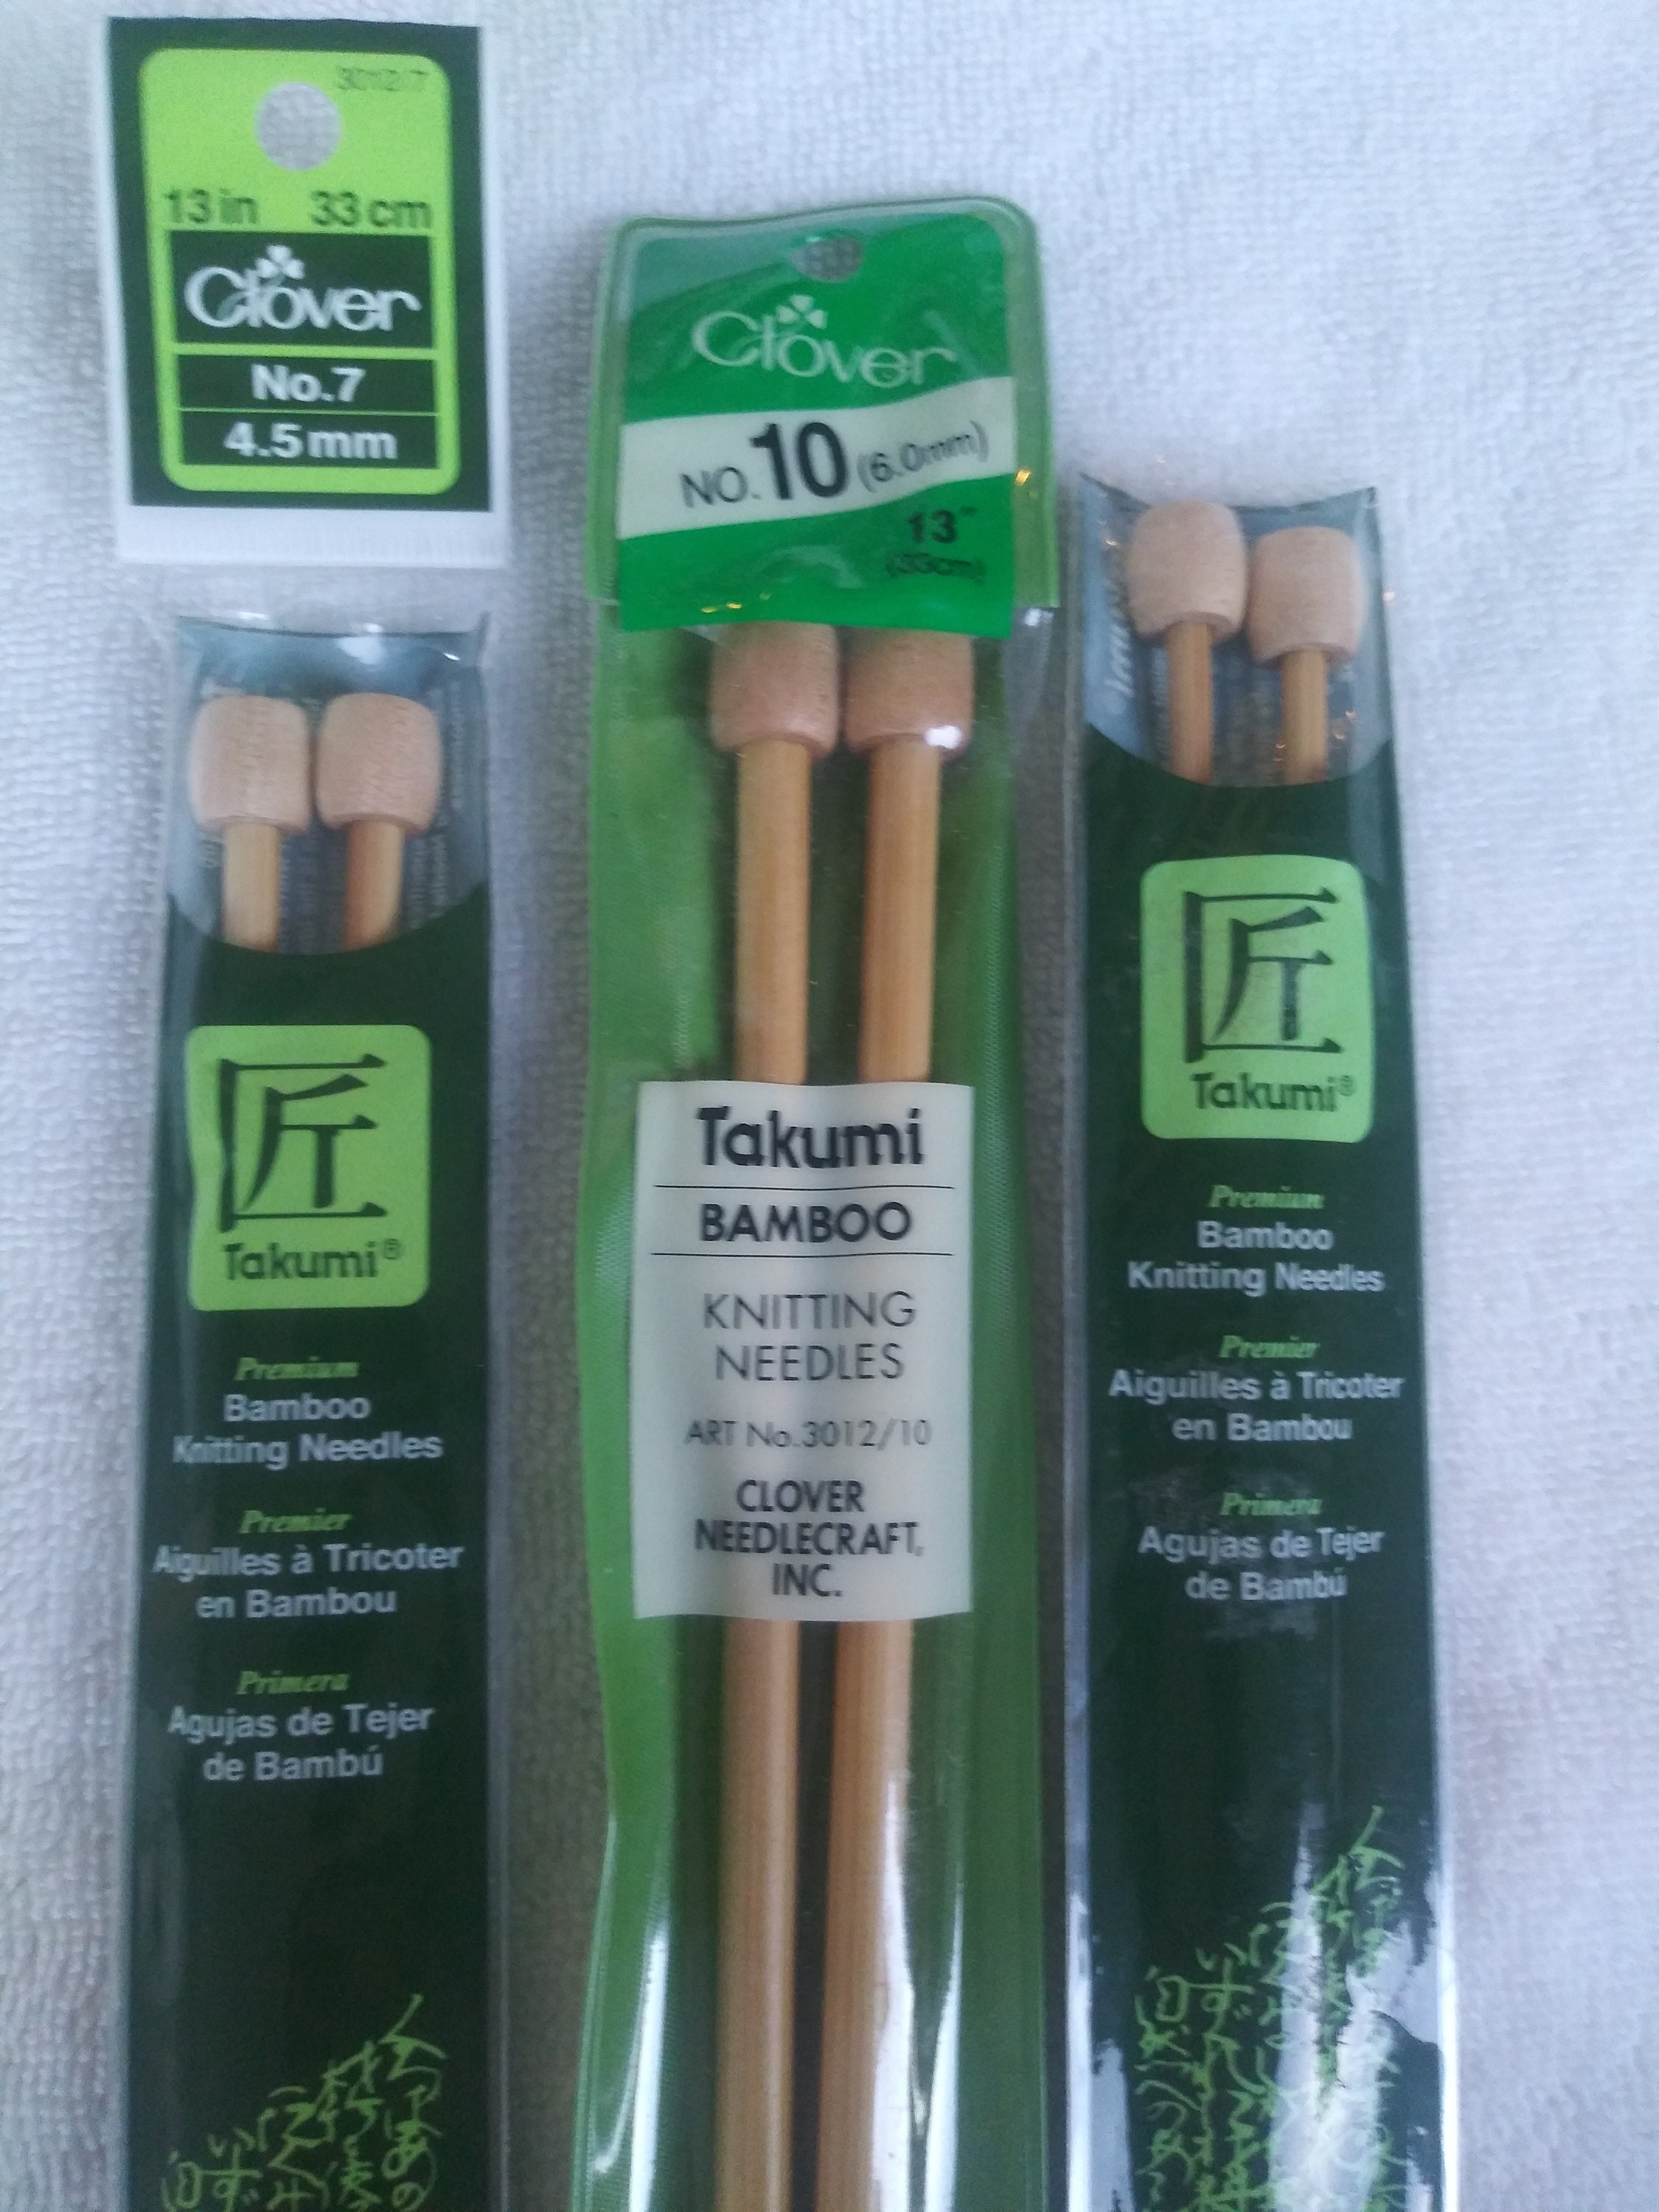 Clover 7 Bamboo 11/8mm Double Point Knitting Needle Set 5ct